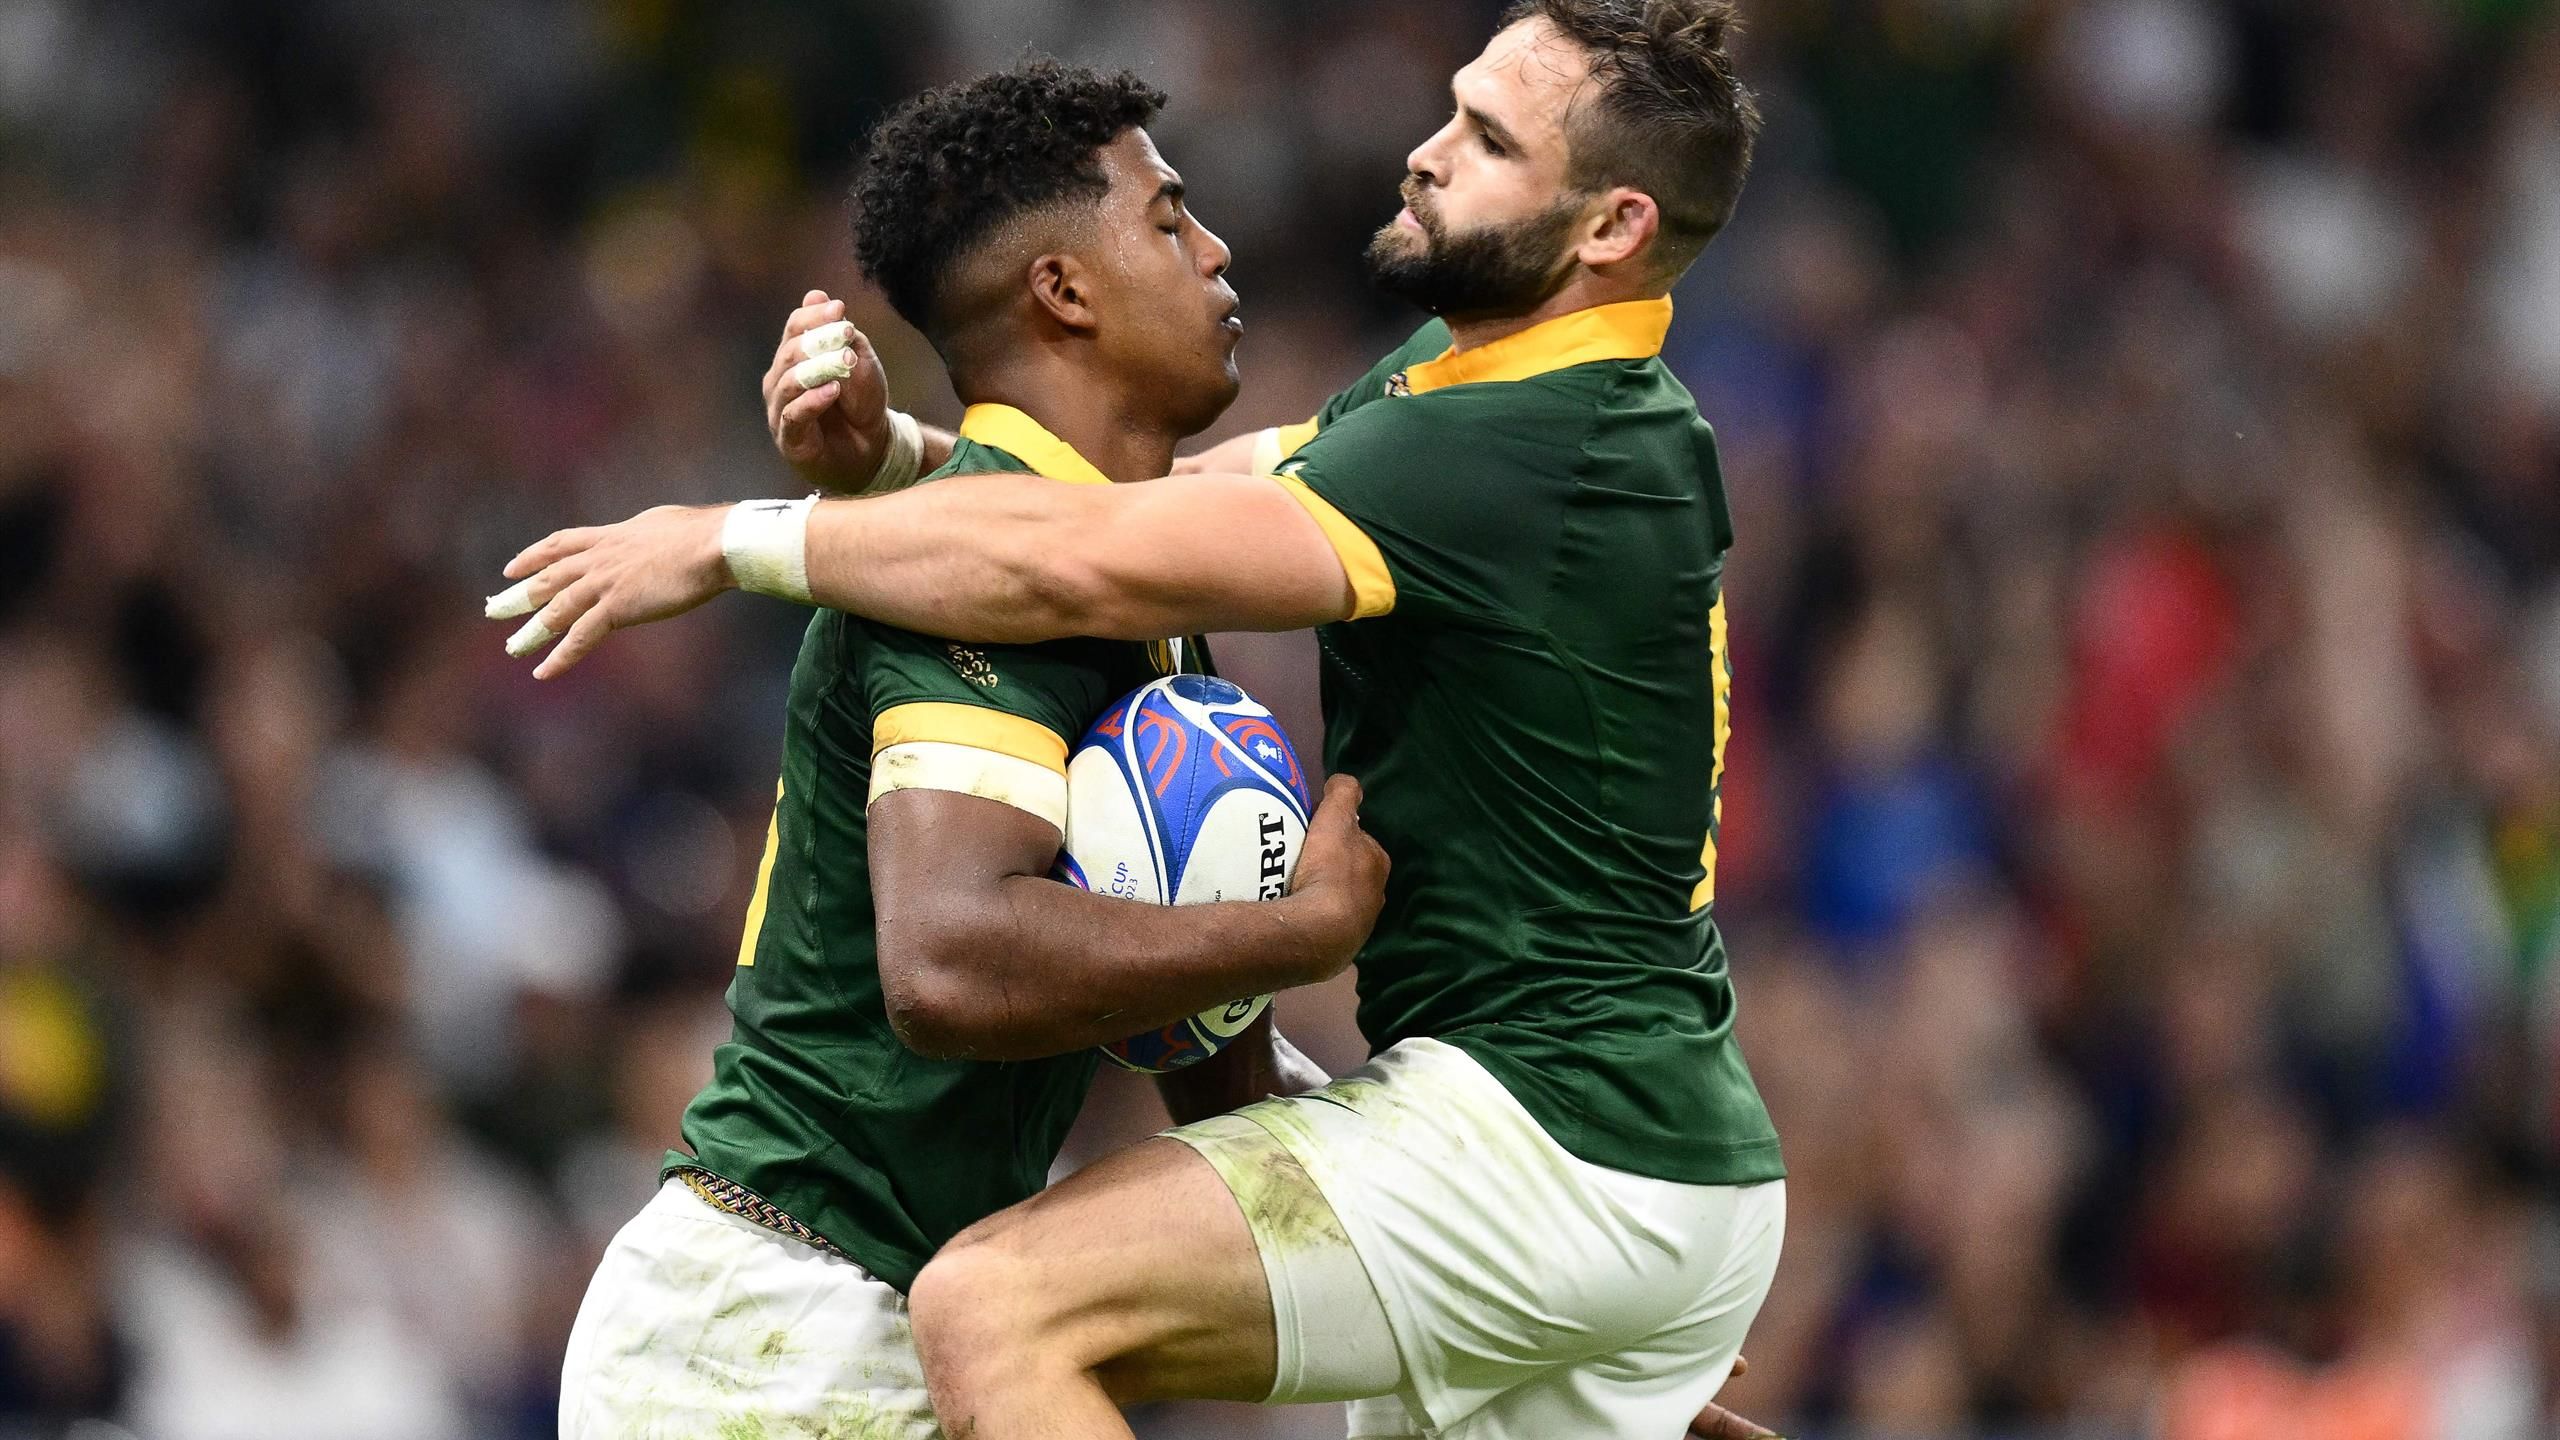 South African teams to play in Champions Cup for first time